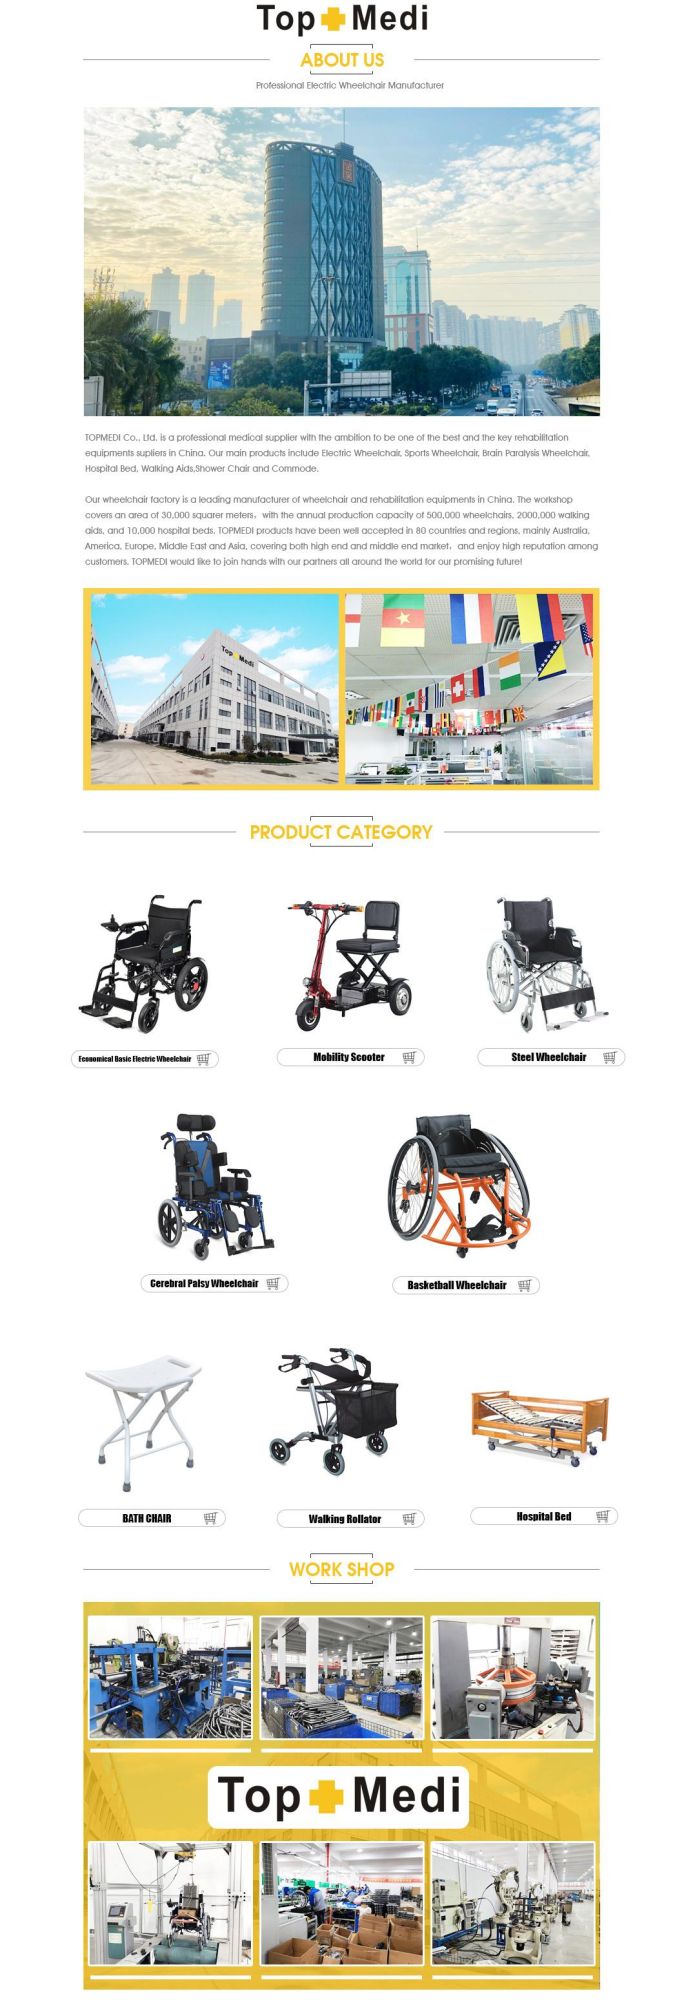 High Performance Elderly Multi-Function Bath Chair Silla Sanitaria Fy609u Used Wheel with Toilet Remote Controols Commode Wheelchair